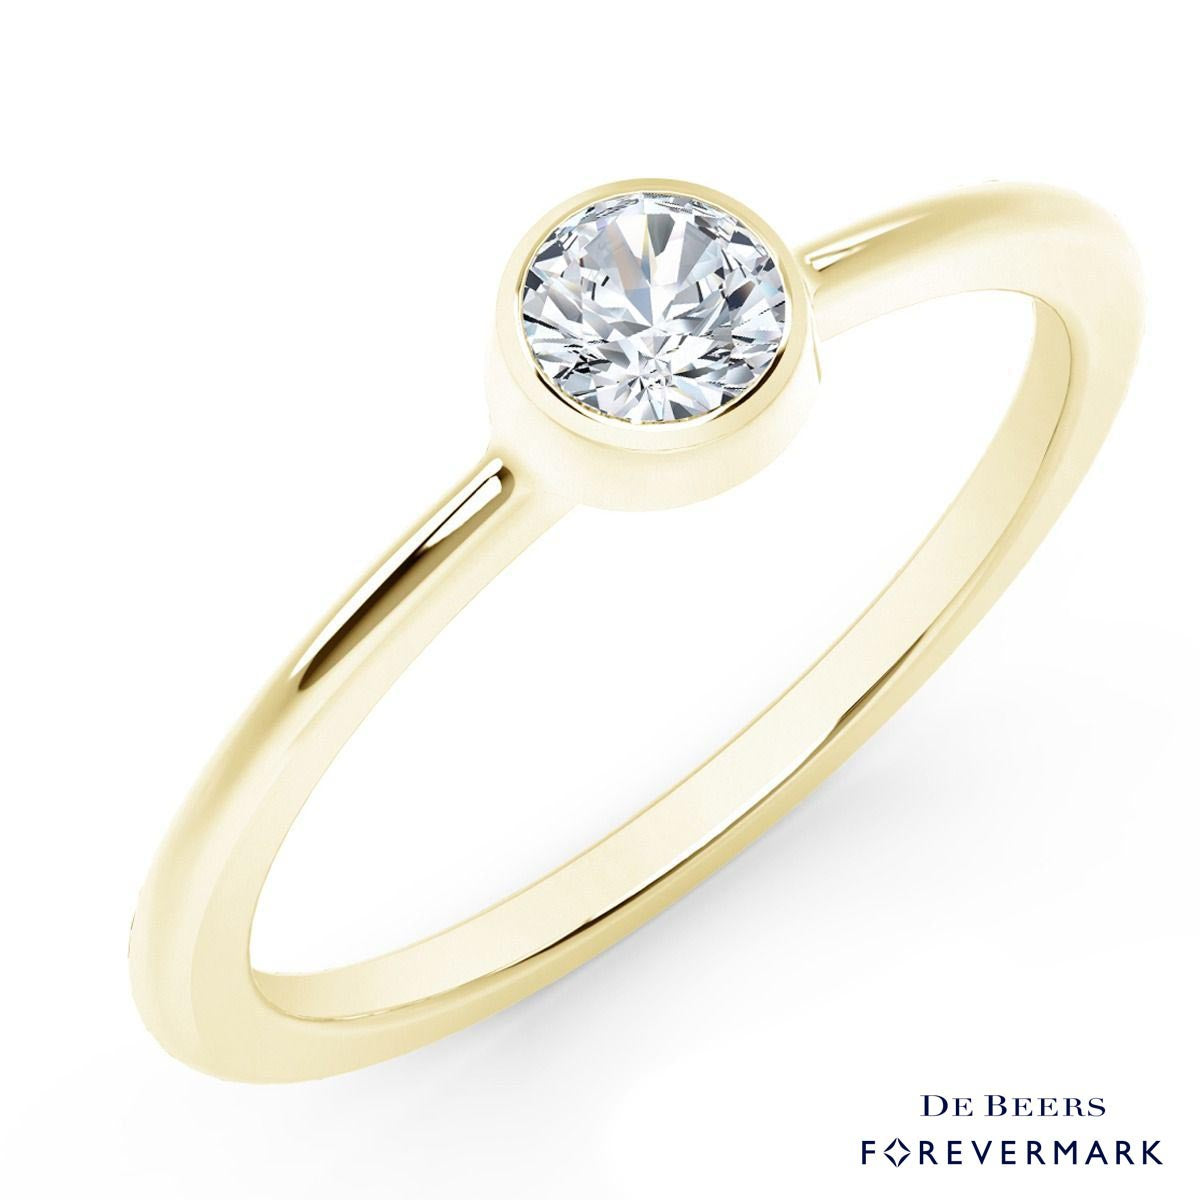 De Beers Forevermark Tribute Collection Classic Bezel Stackable Ring in 18kt Yellow Gold (1/4ct)